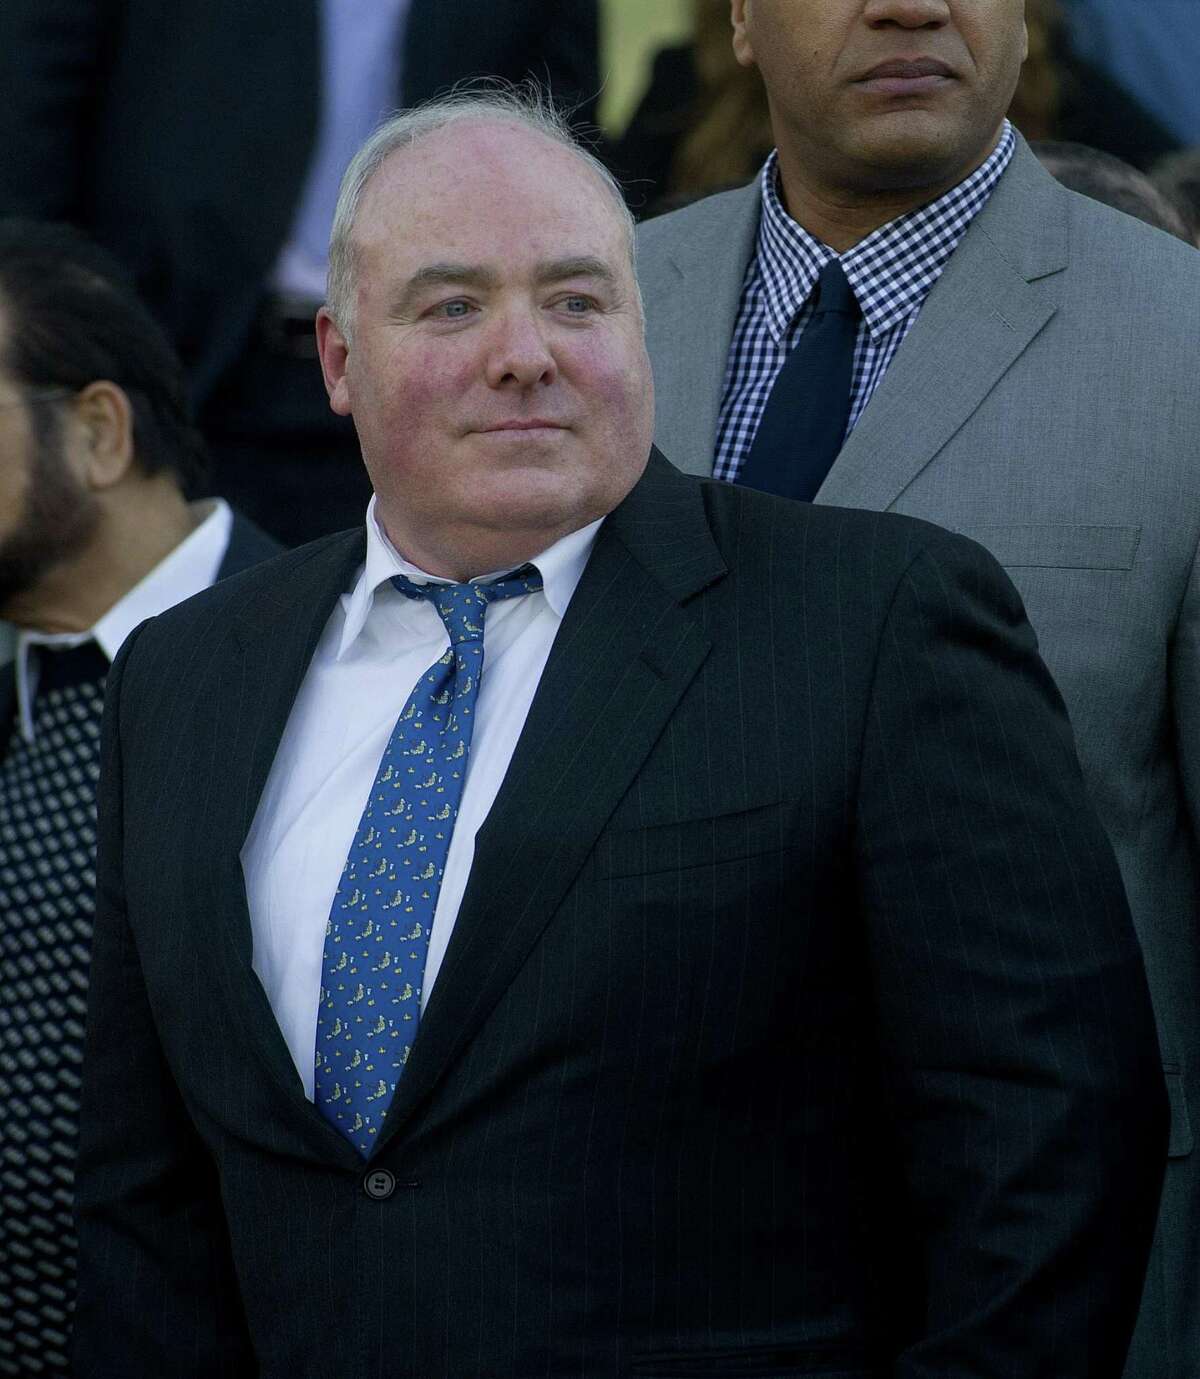 Michael Skakel exits the State Superior Court in Stamford, Conn., after being released on bond in November 2013.